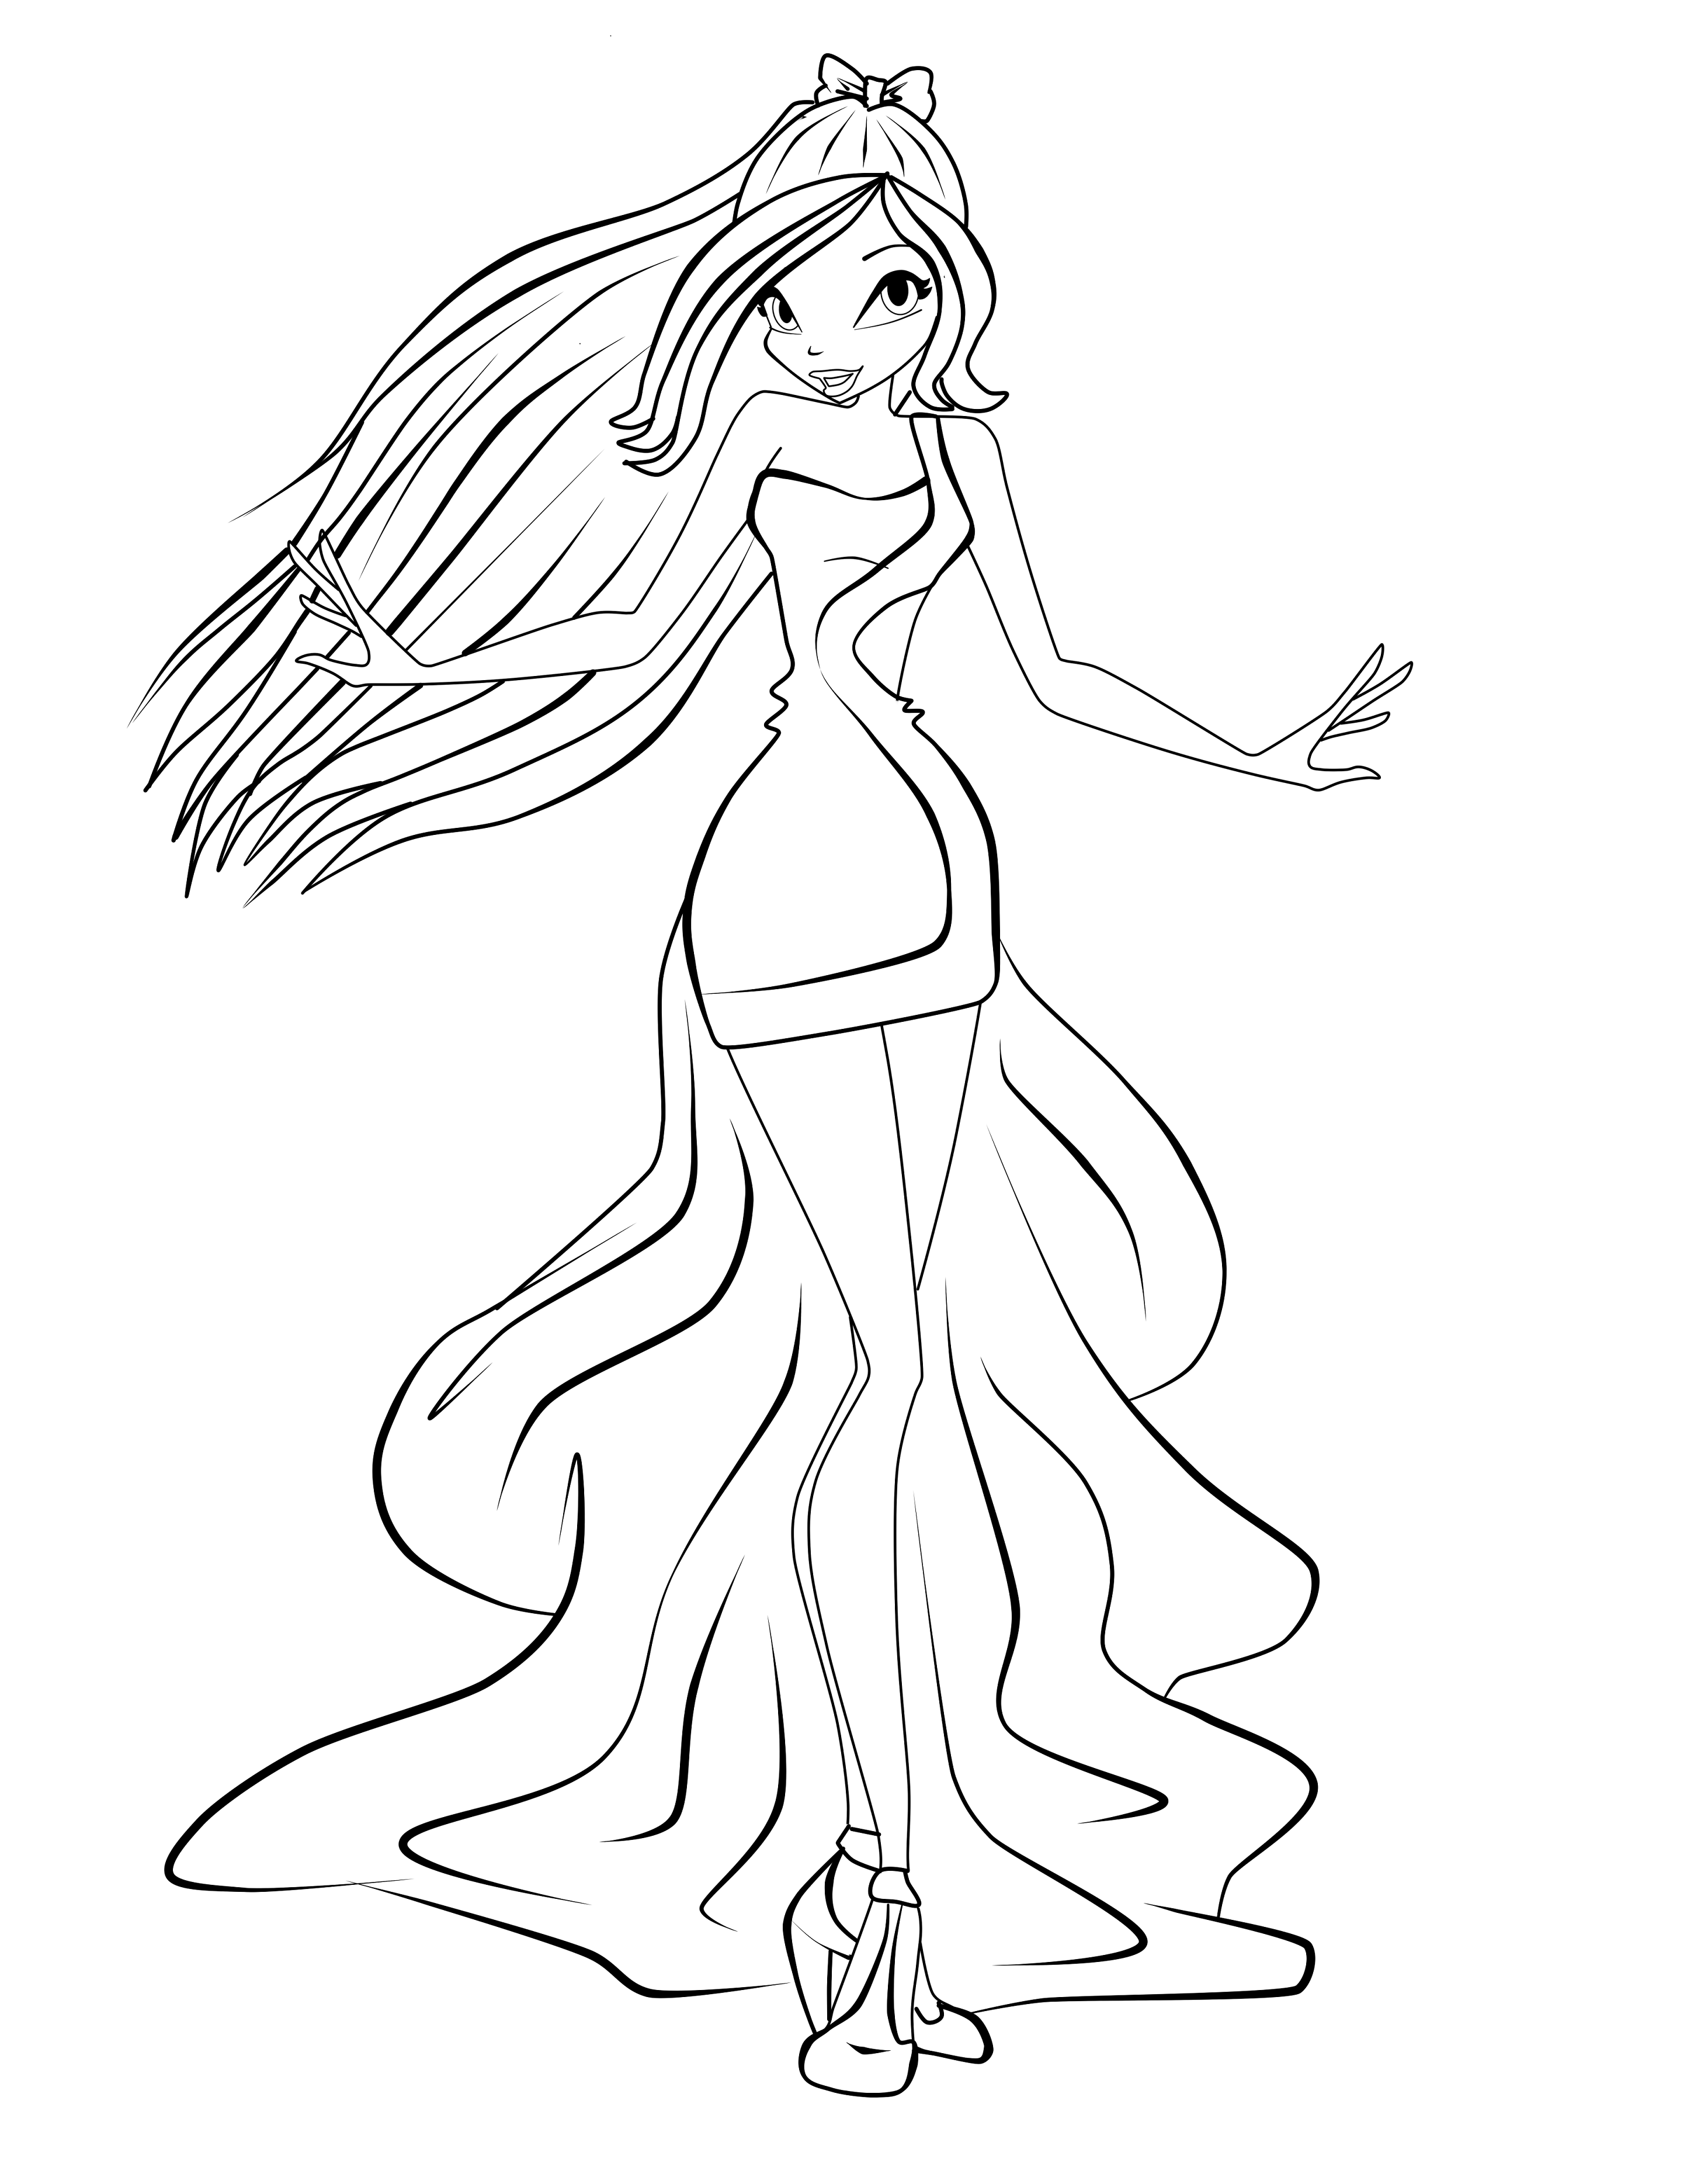 ,Winx Princess coloring pages, download and print for free